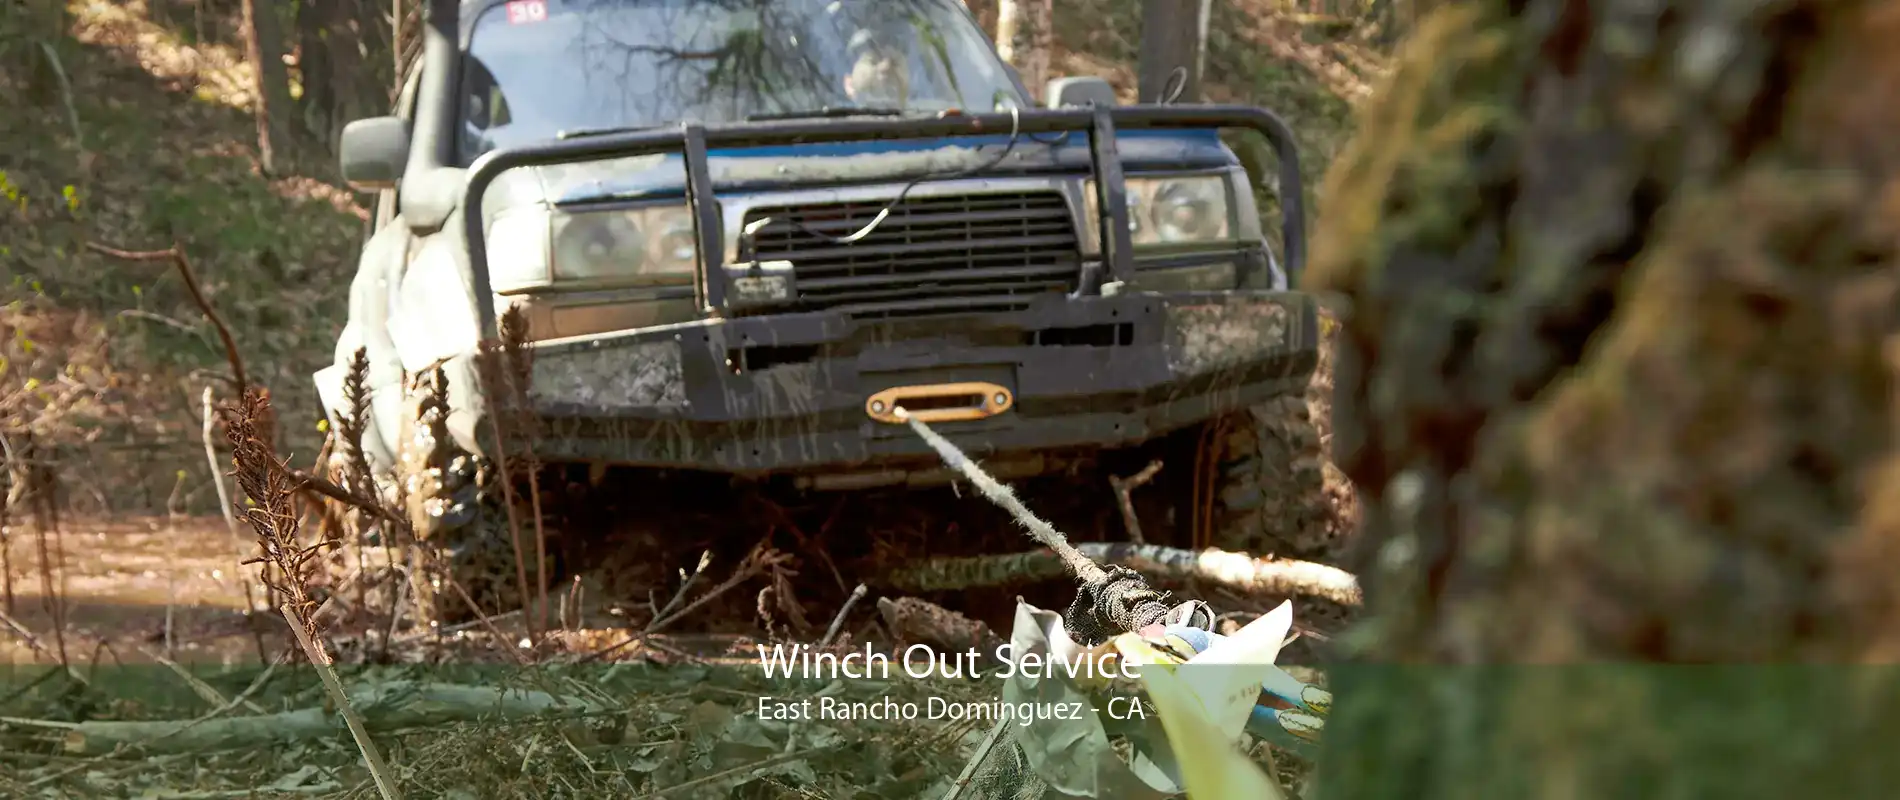 Winch Out Service East Rancho Dominguez - CA